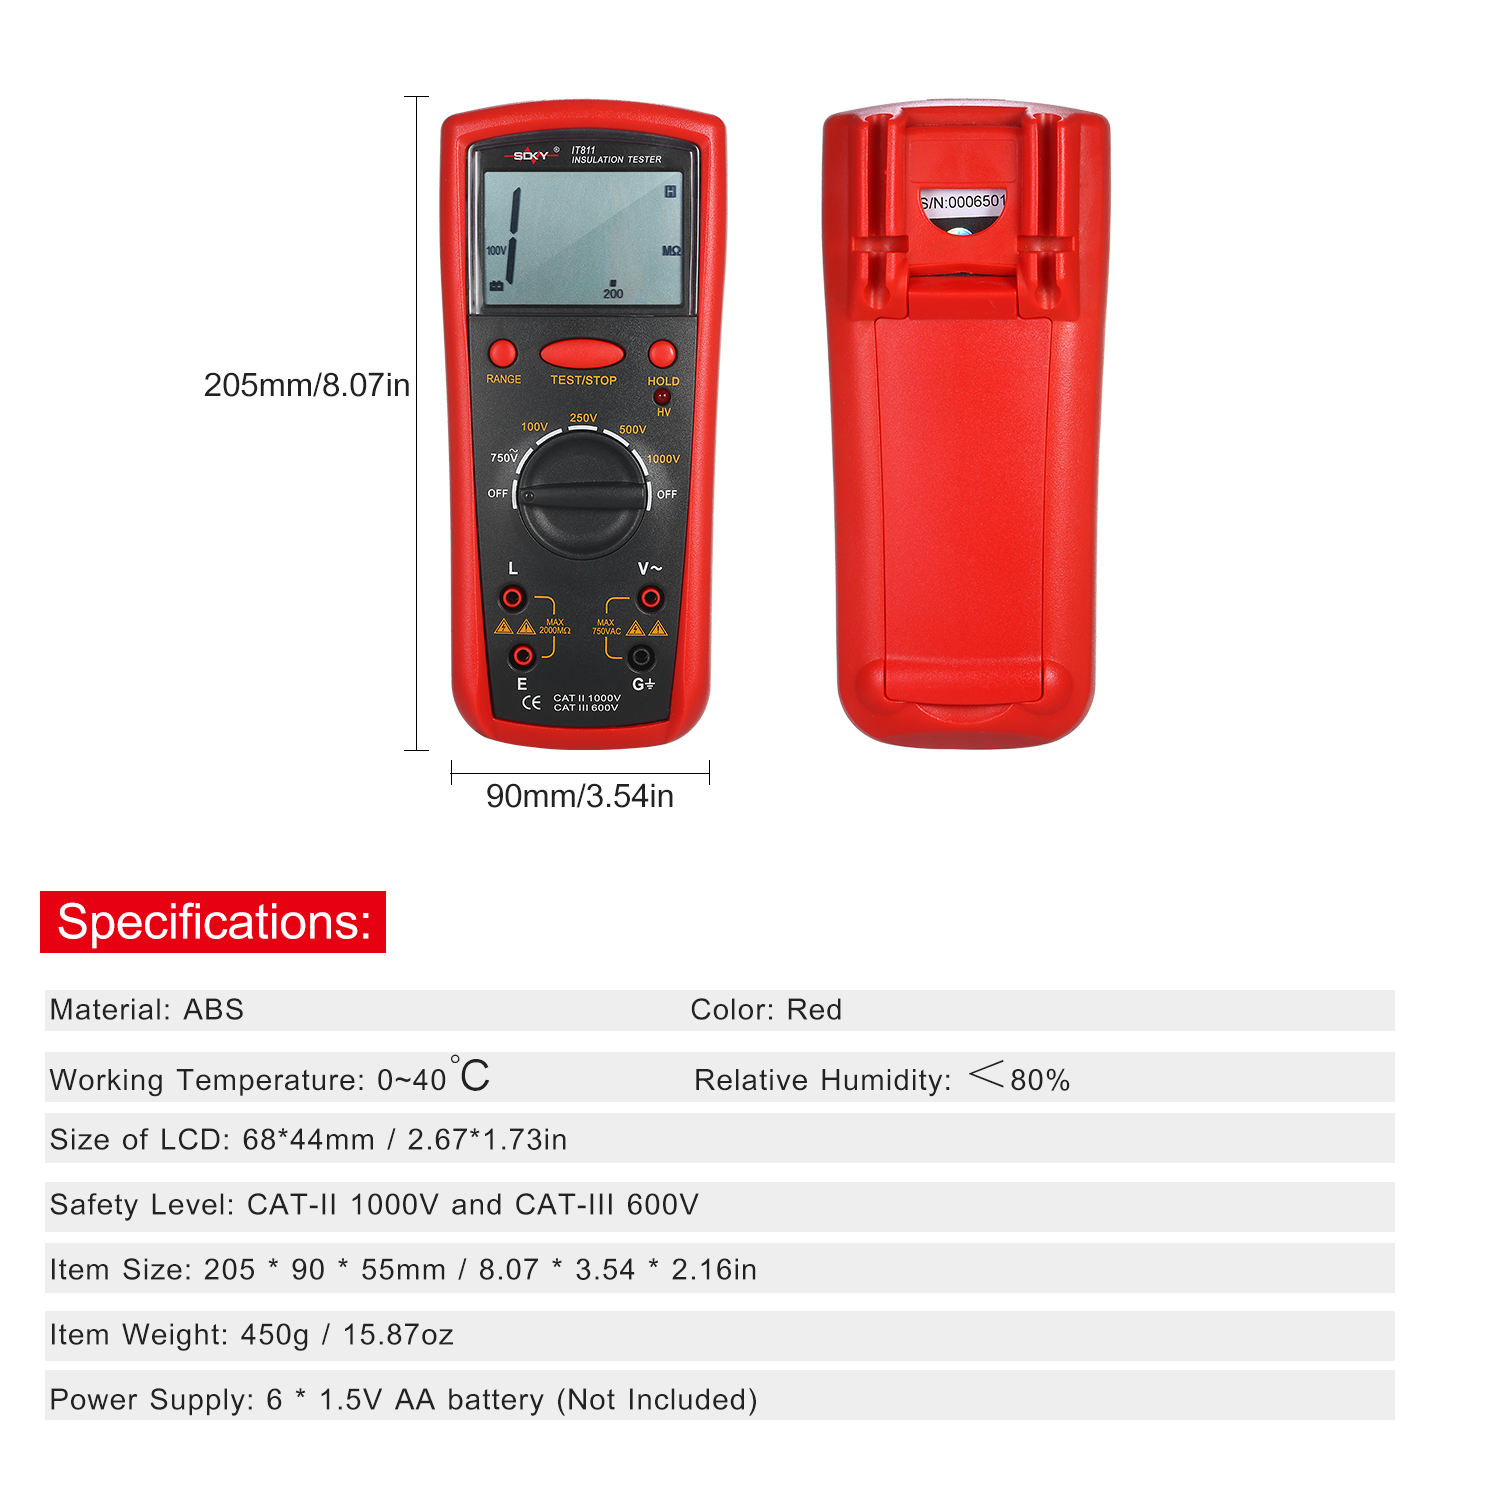 Insulation Resistance Meter Digital Megger Ohmmeter Insulation Tester 1MΩ-20GΩ Auto-Ranging High Accuracy Insulation Instrument